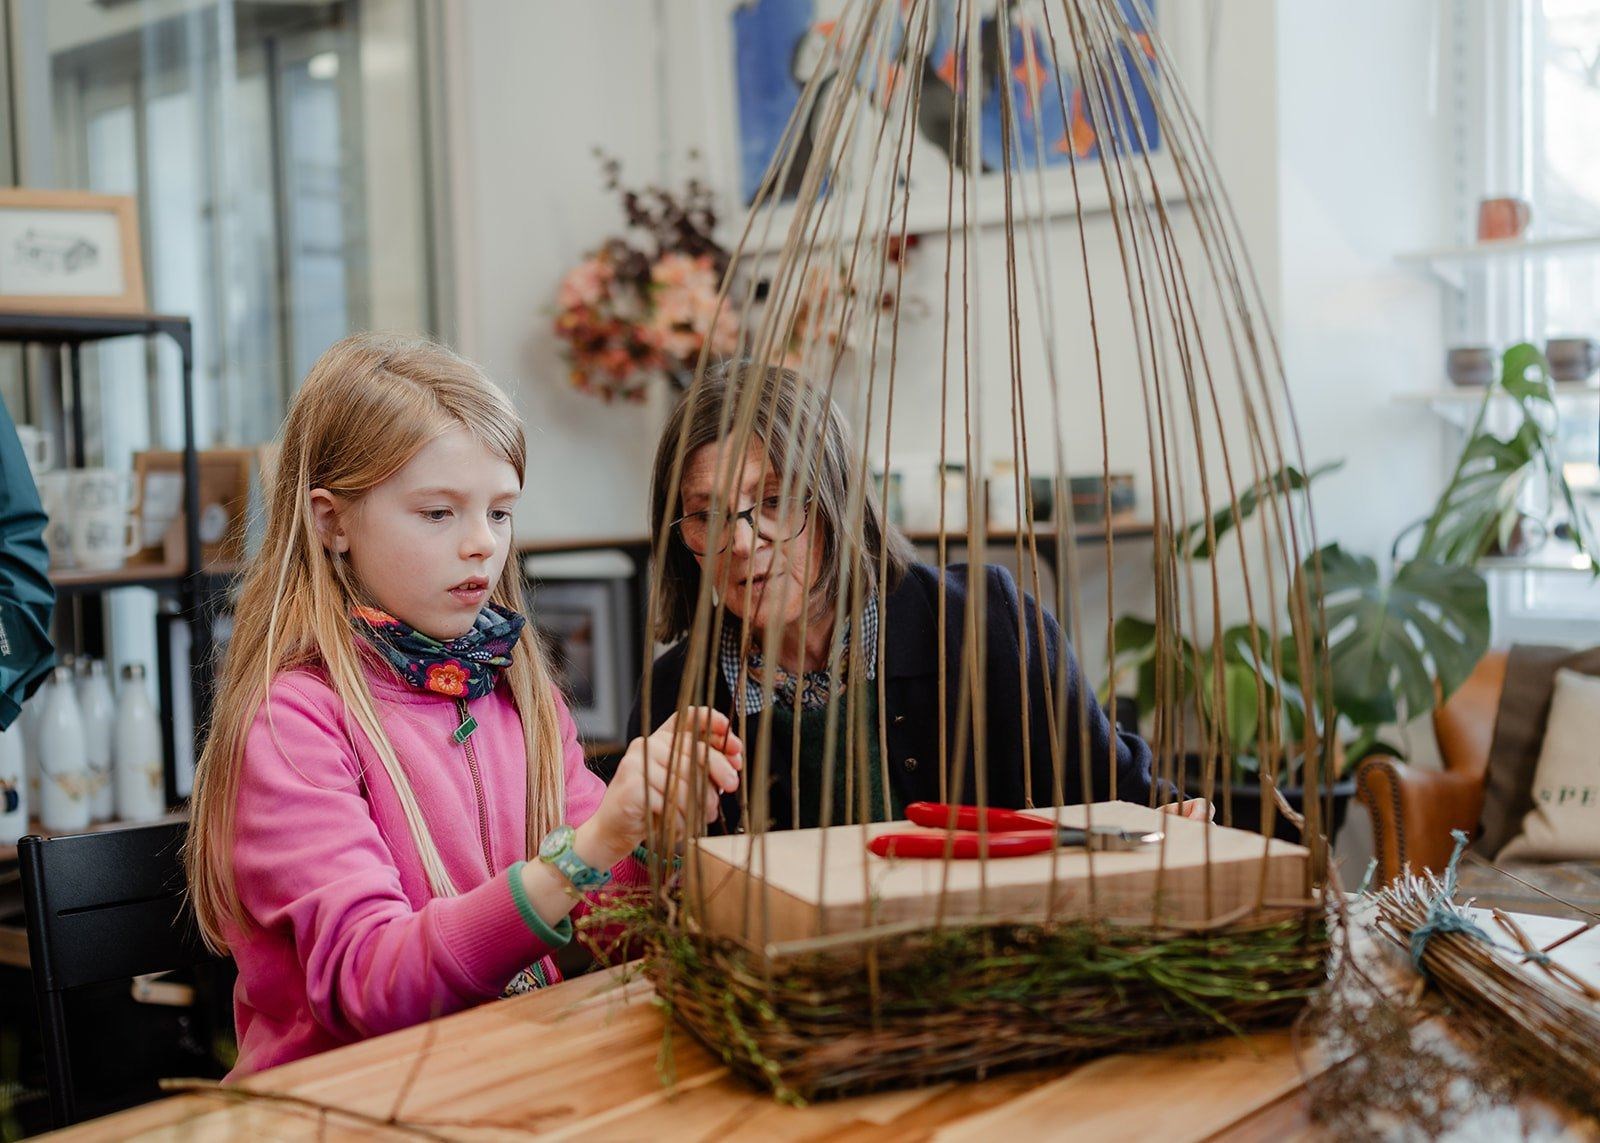 Weaving the willow basket which will hold the Commonplace Book. Picture: Catriona Parmenter